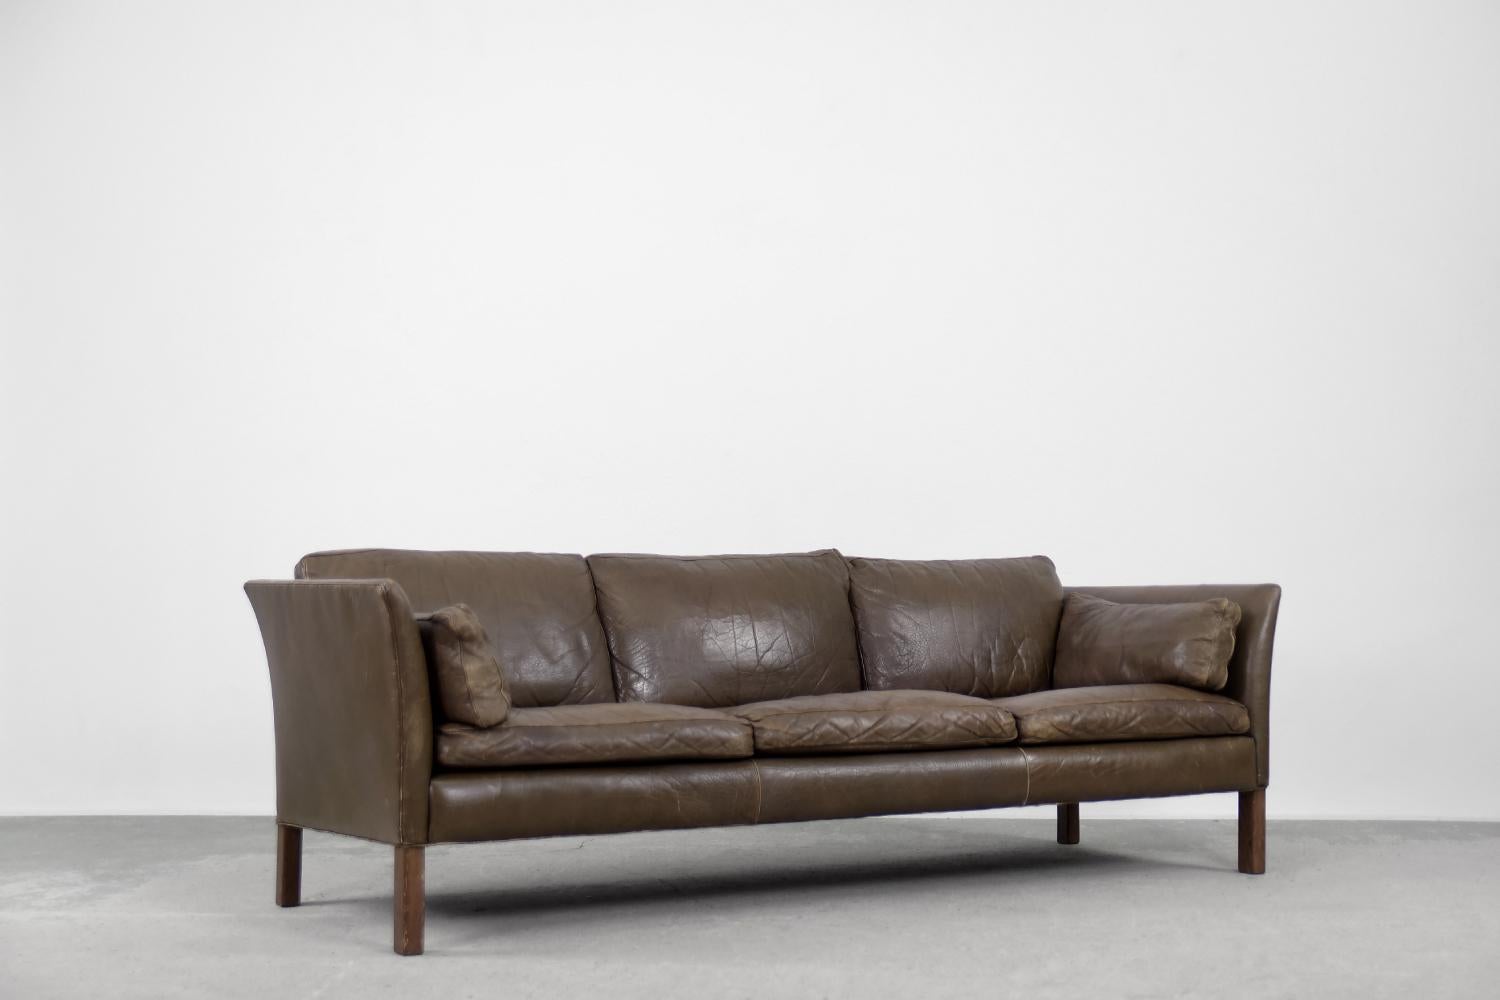 This Cromwell 3-seater leather sofa was designed by Arne Norell during the 1960s. It is a timeless design and as popular today as it was 60 years ago when it was launched. The sofa is upholstered with high-quality natural leather in shades of earthy